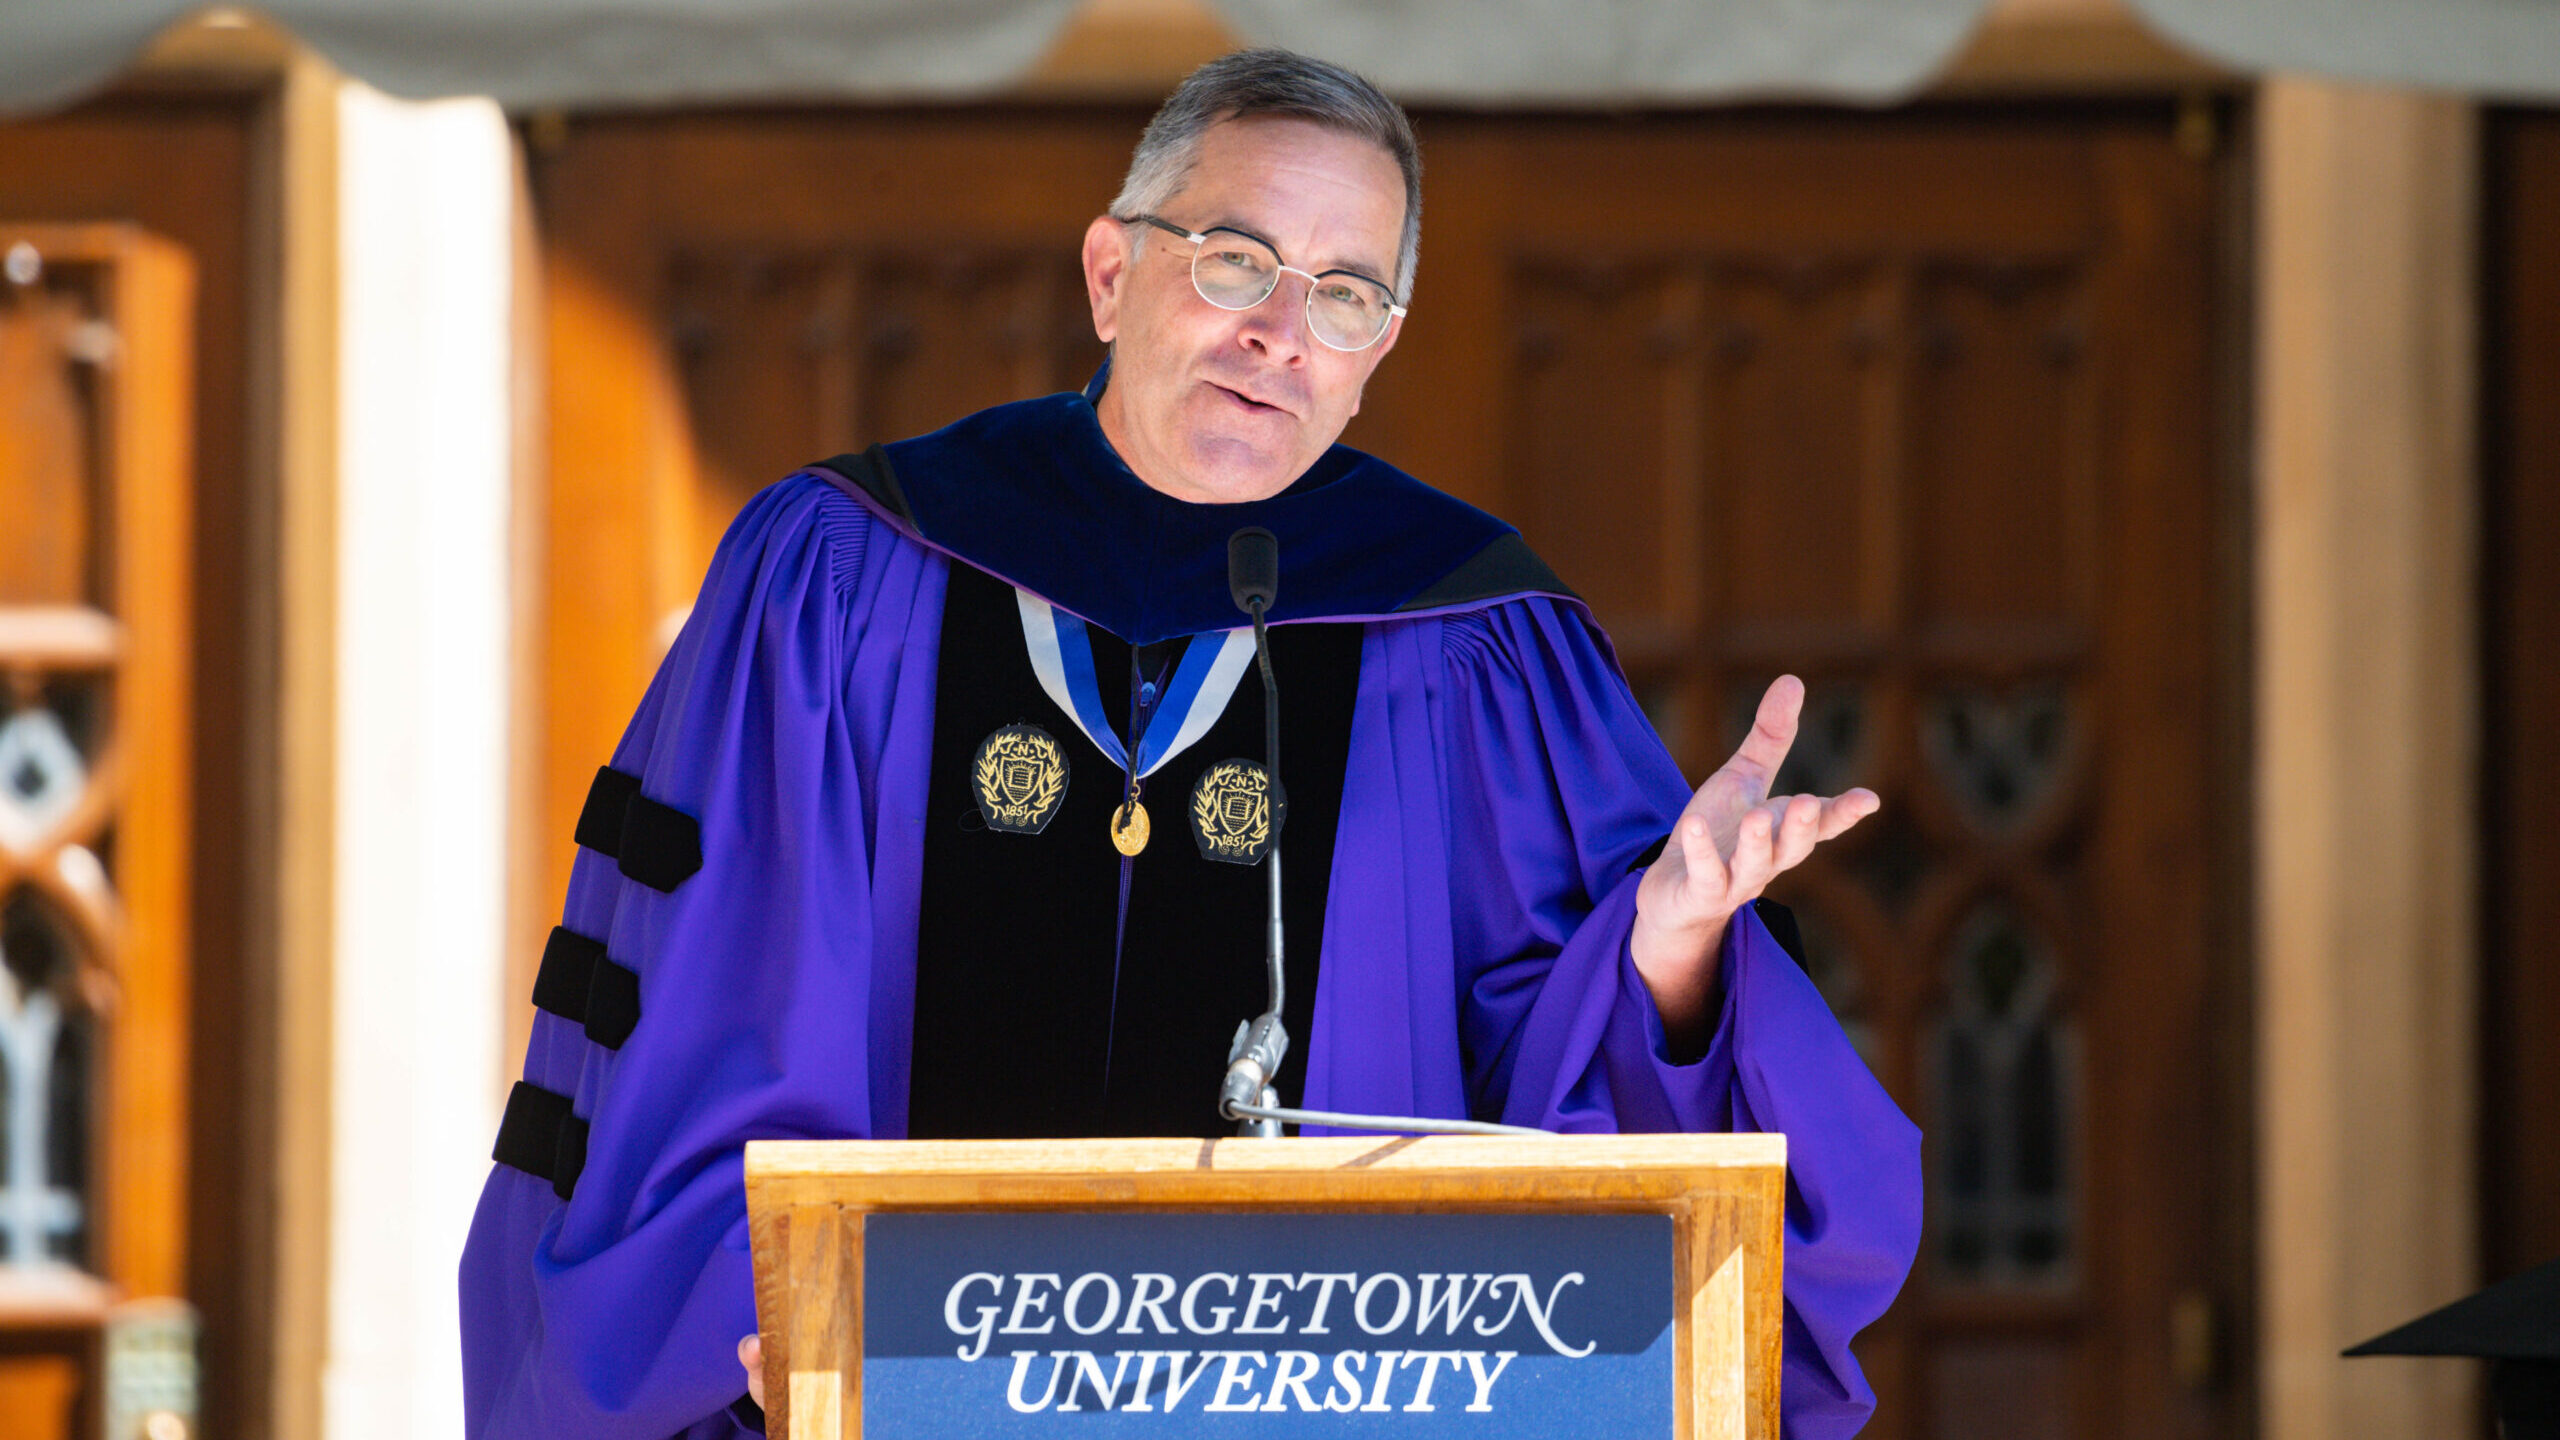 A bespectacled man in academic regalia speaks at a podium marked Georgetown University.